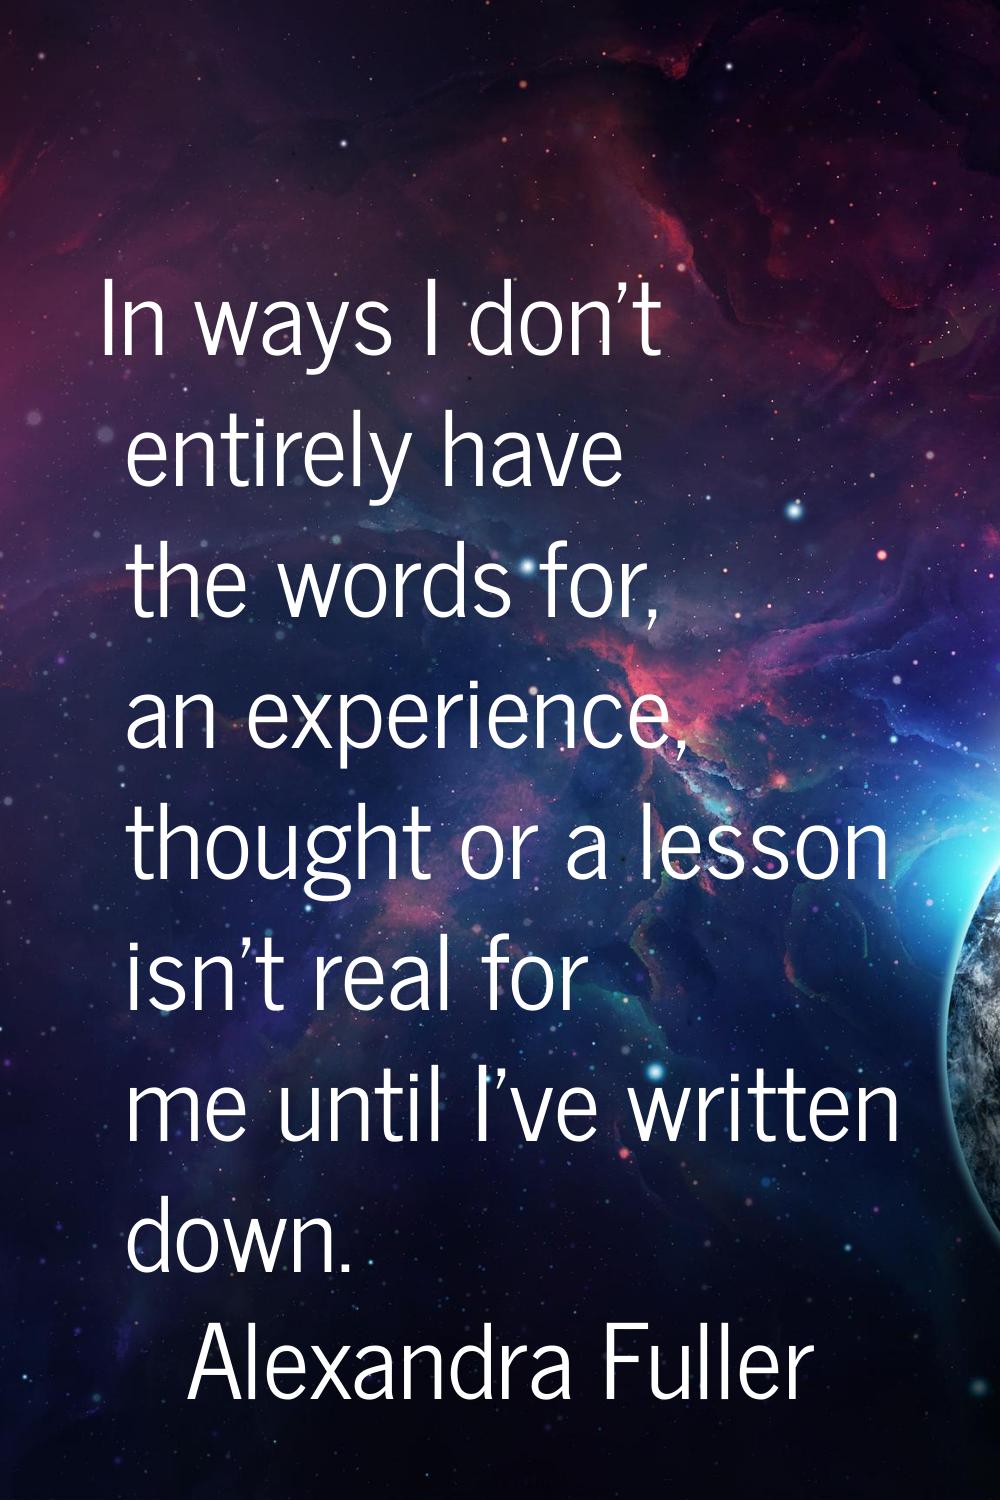 In ways I don't entirely have the words for, an experience, thought or a lesson isn't real for me u